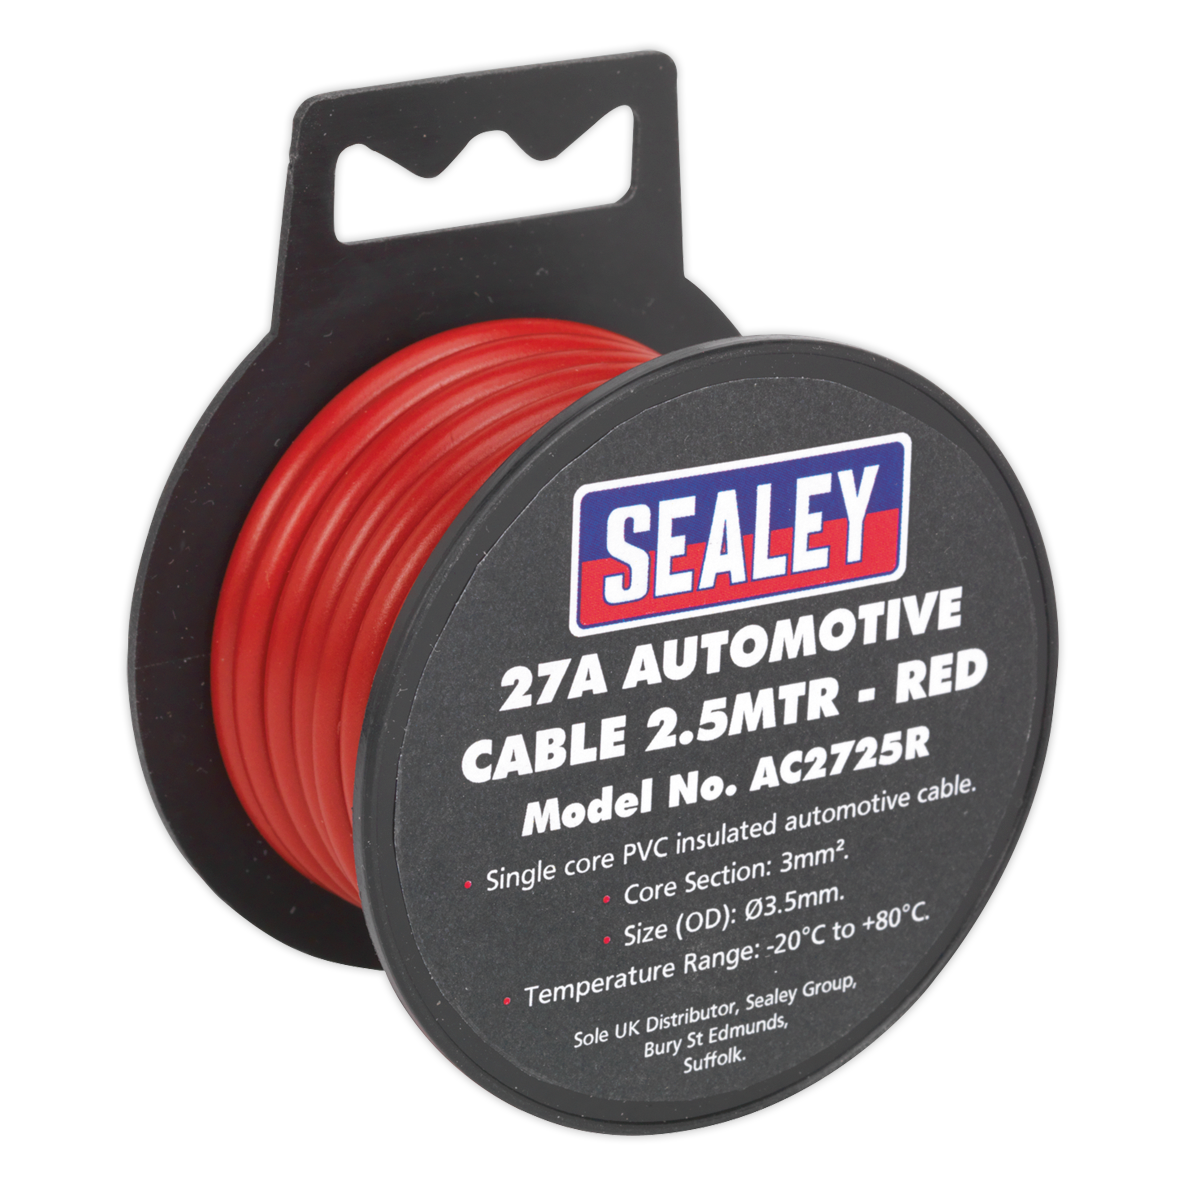 Sealey Automotive Cable Thick Wall 27A 2.5m Red